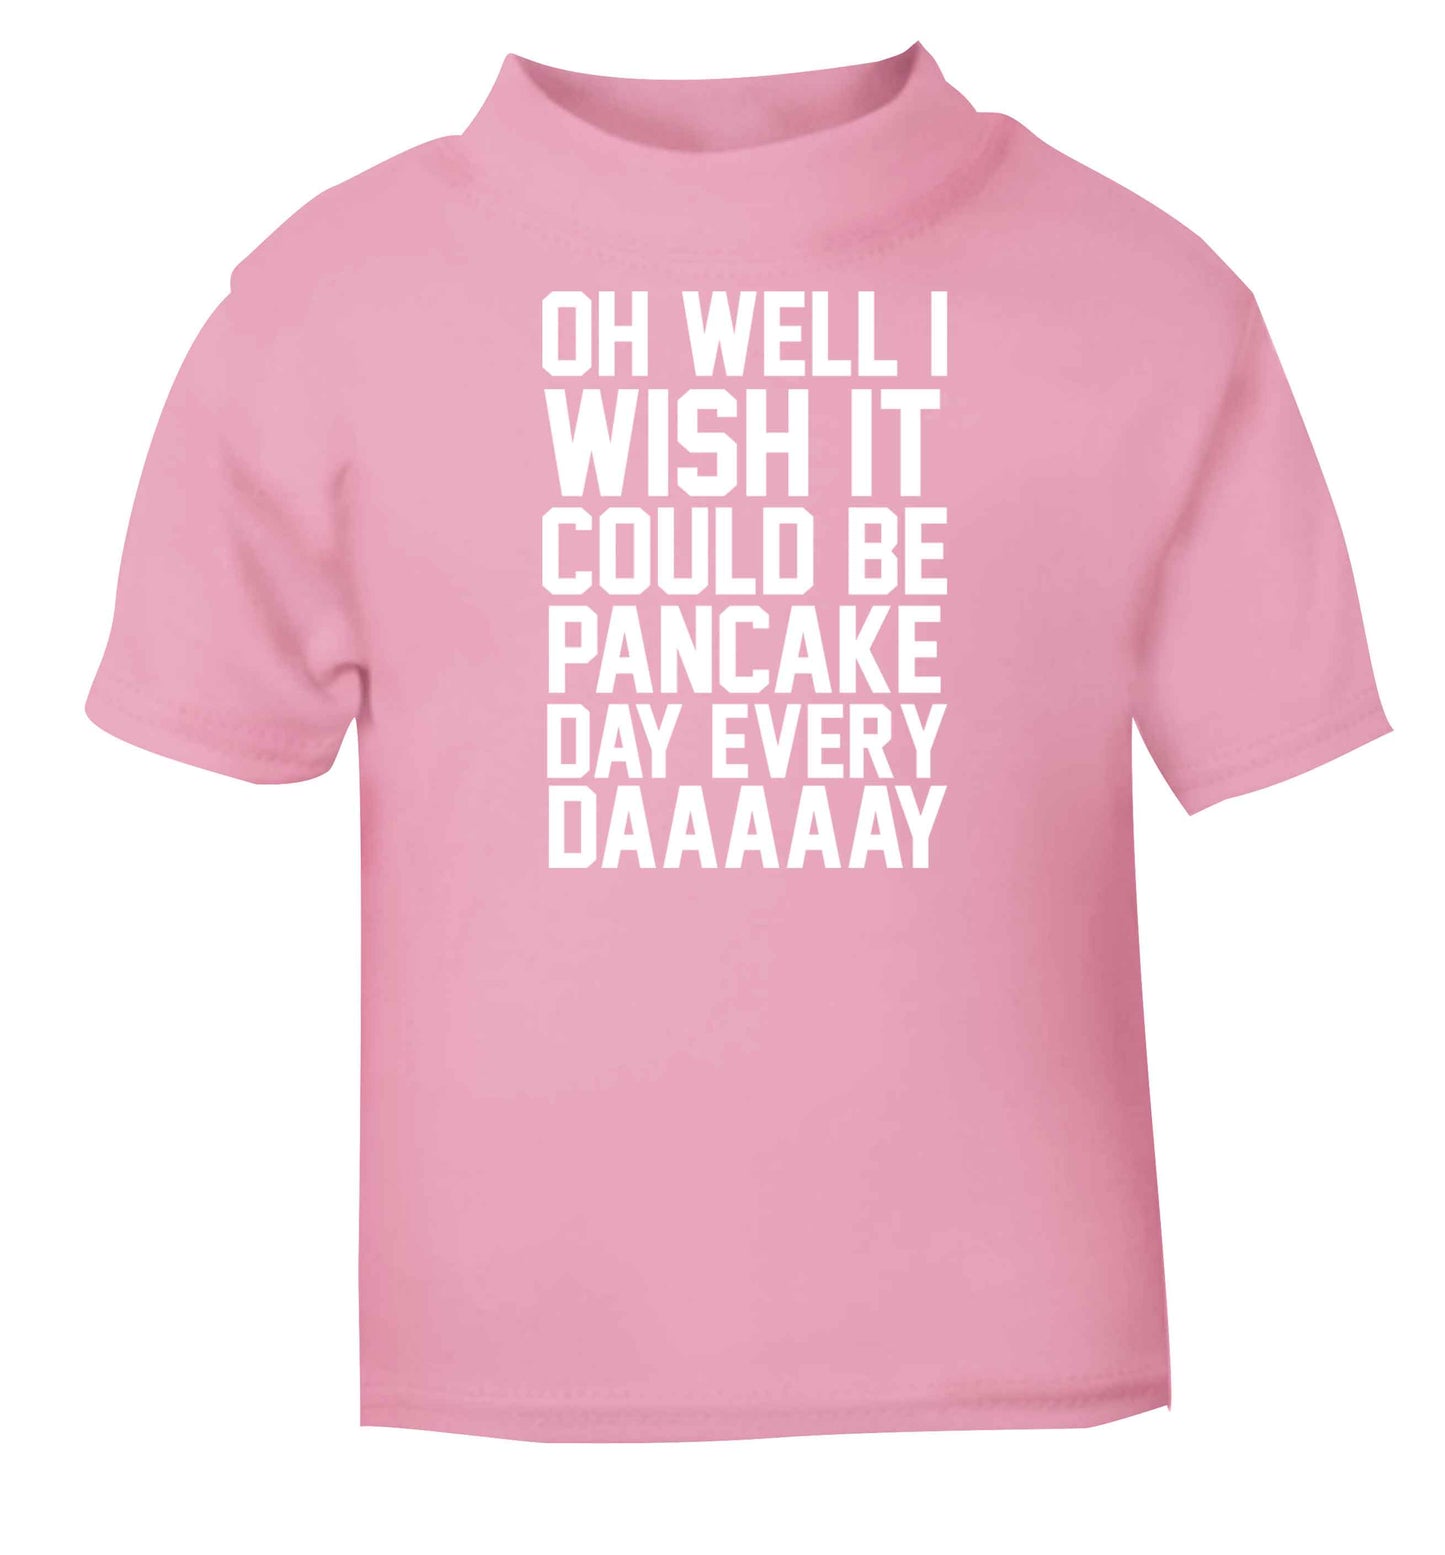 Oh well I wish it could be pancake day every day light pink baby toddler Tshirt 2 Years